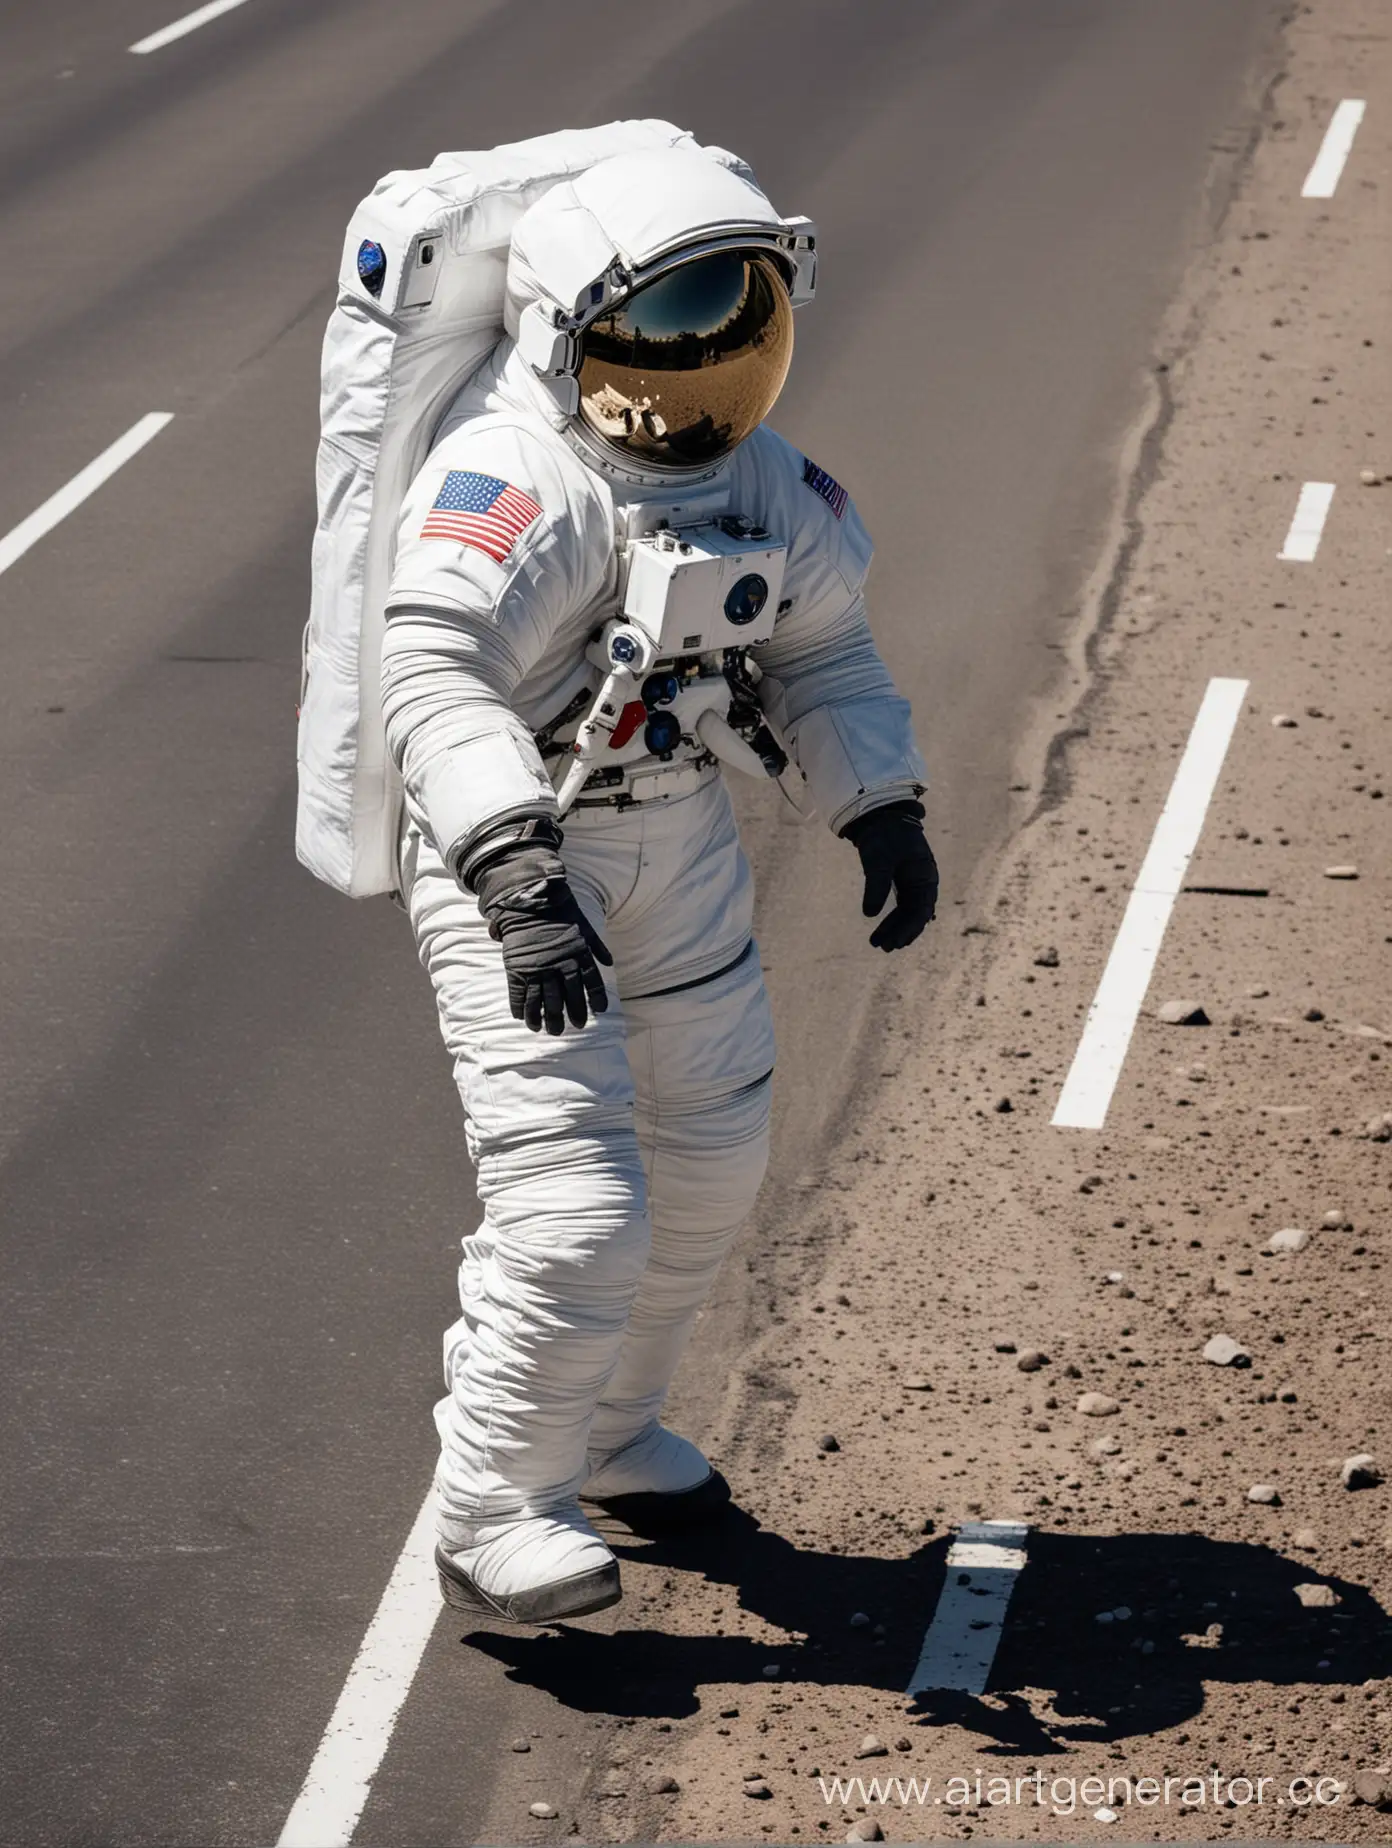 An astronaut who crosses the road from the side